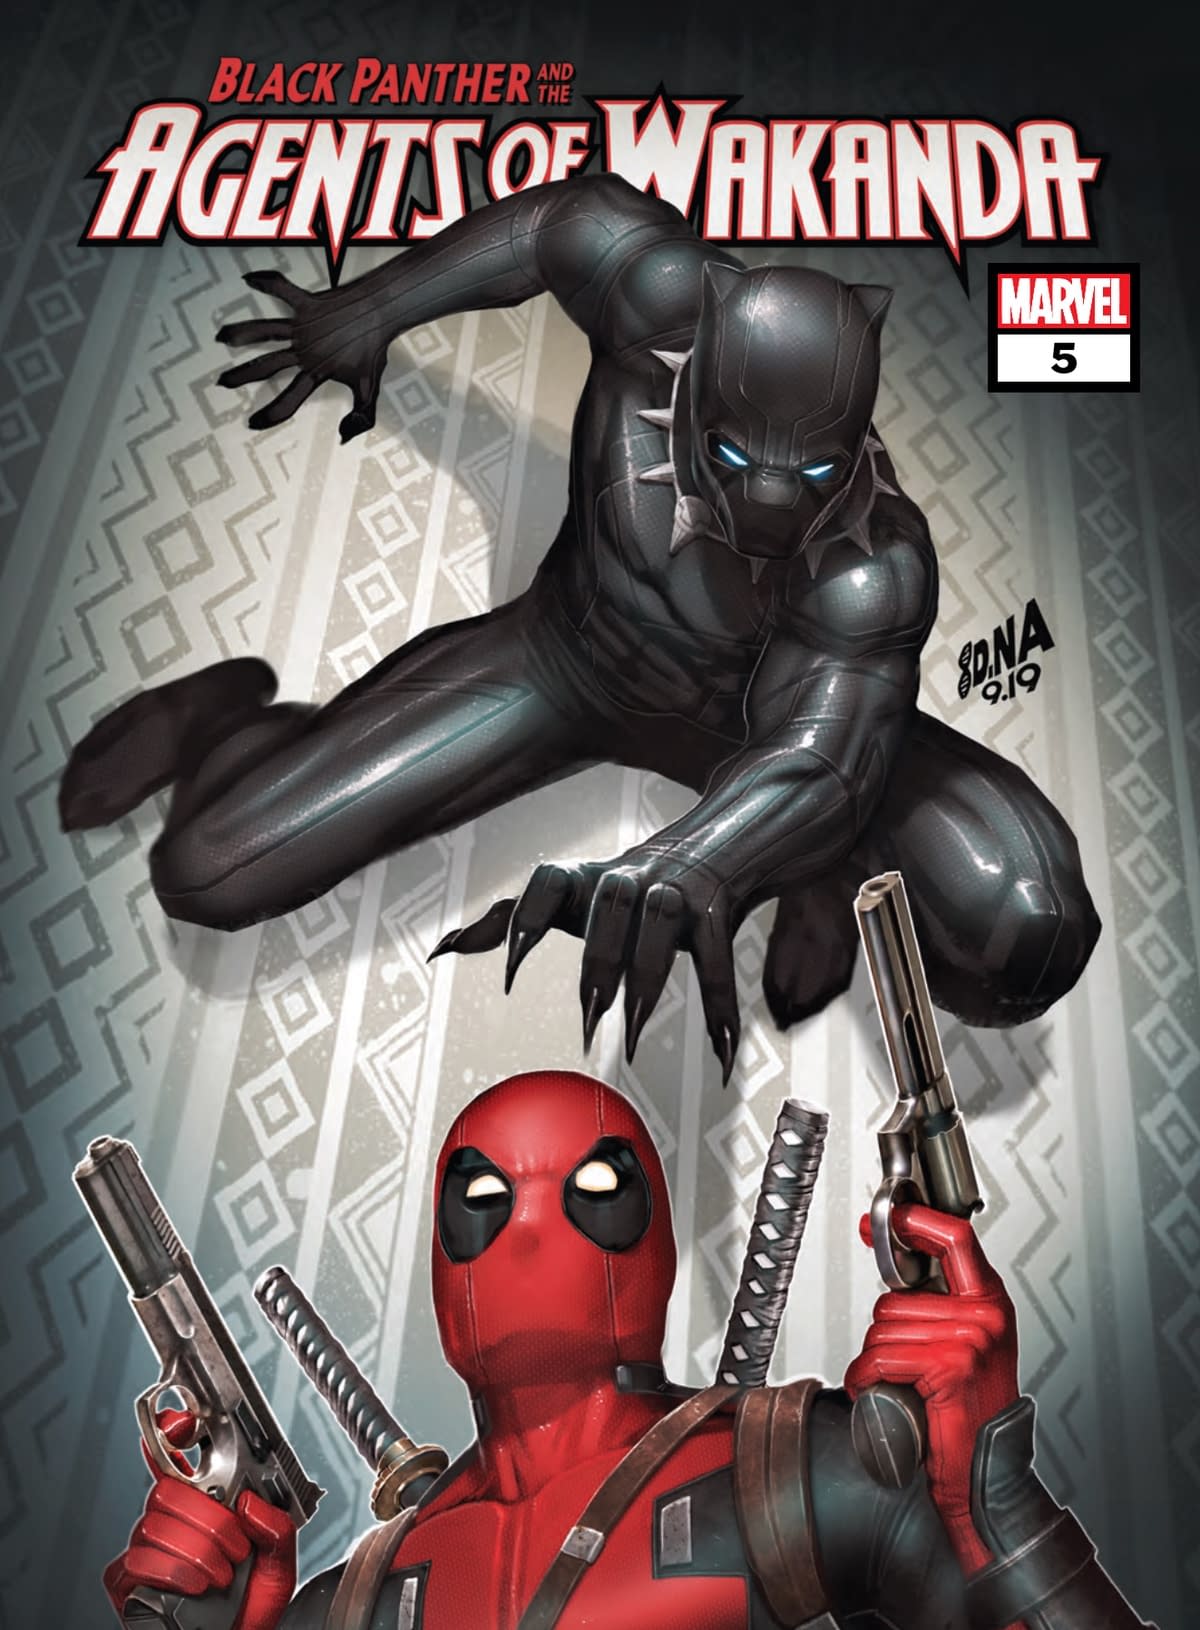 REVIEW: Black Panther And The Agents Of Wakanda #5 -- "This Very Fun Issue Makes All The Right Moves"